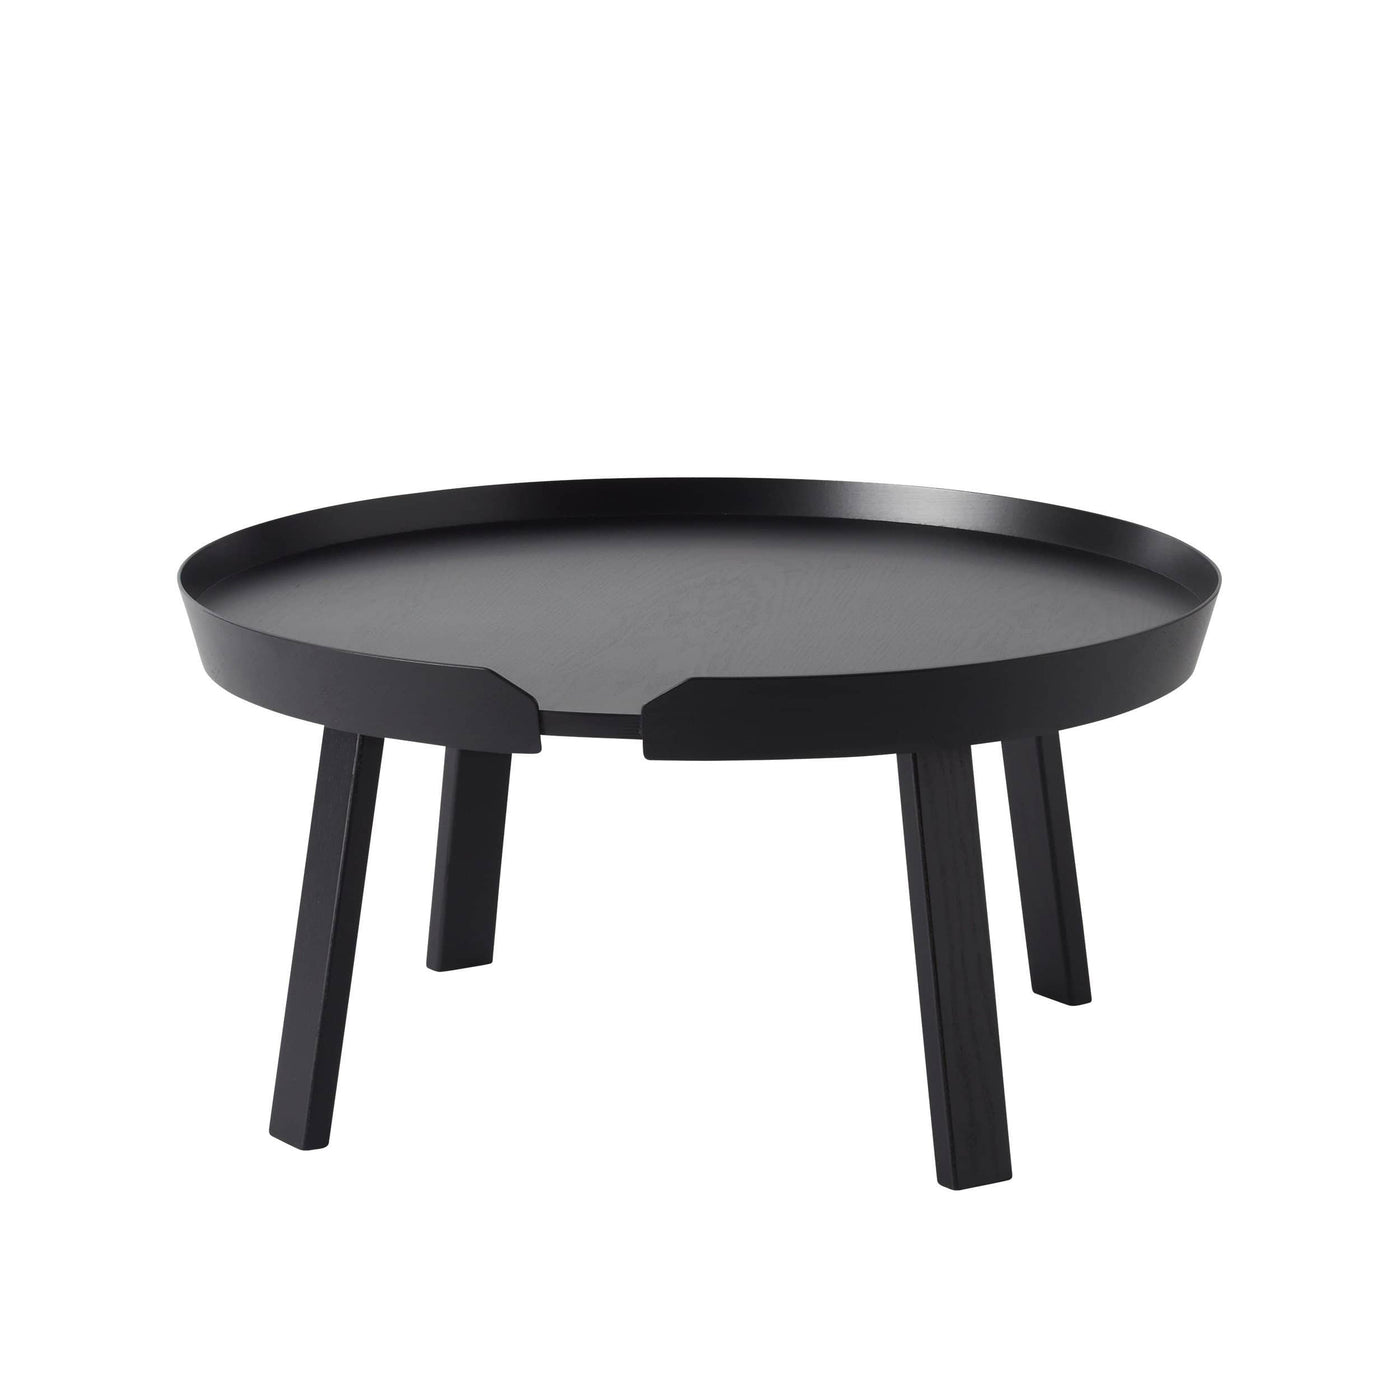 Muuto Around Coffee Table large. Available from someday designs . #colour_black